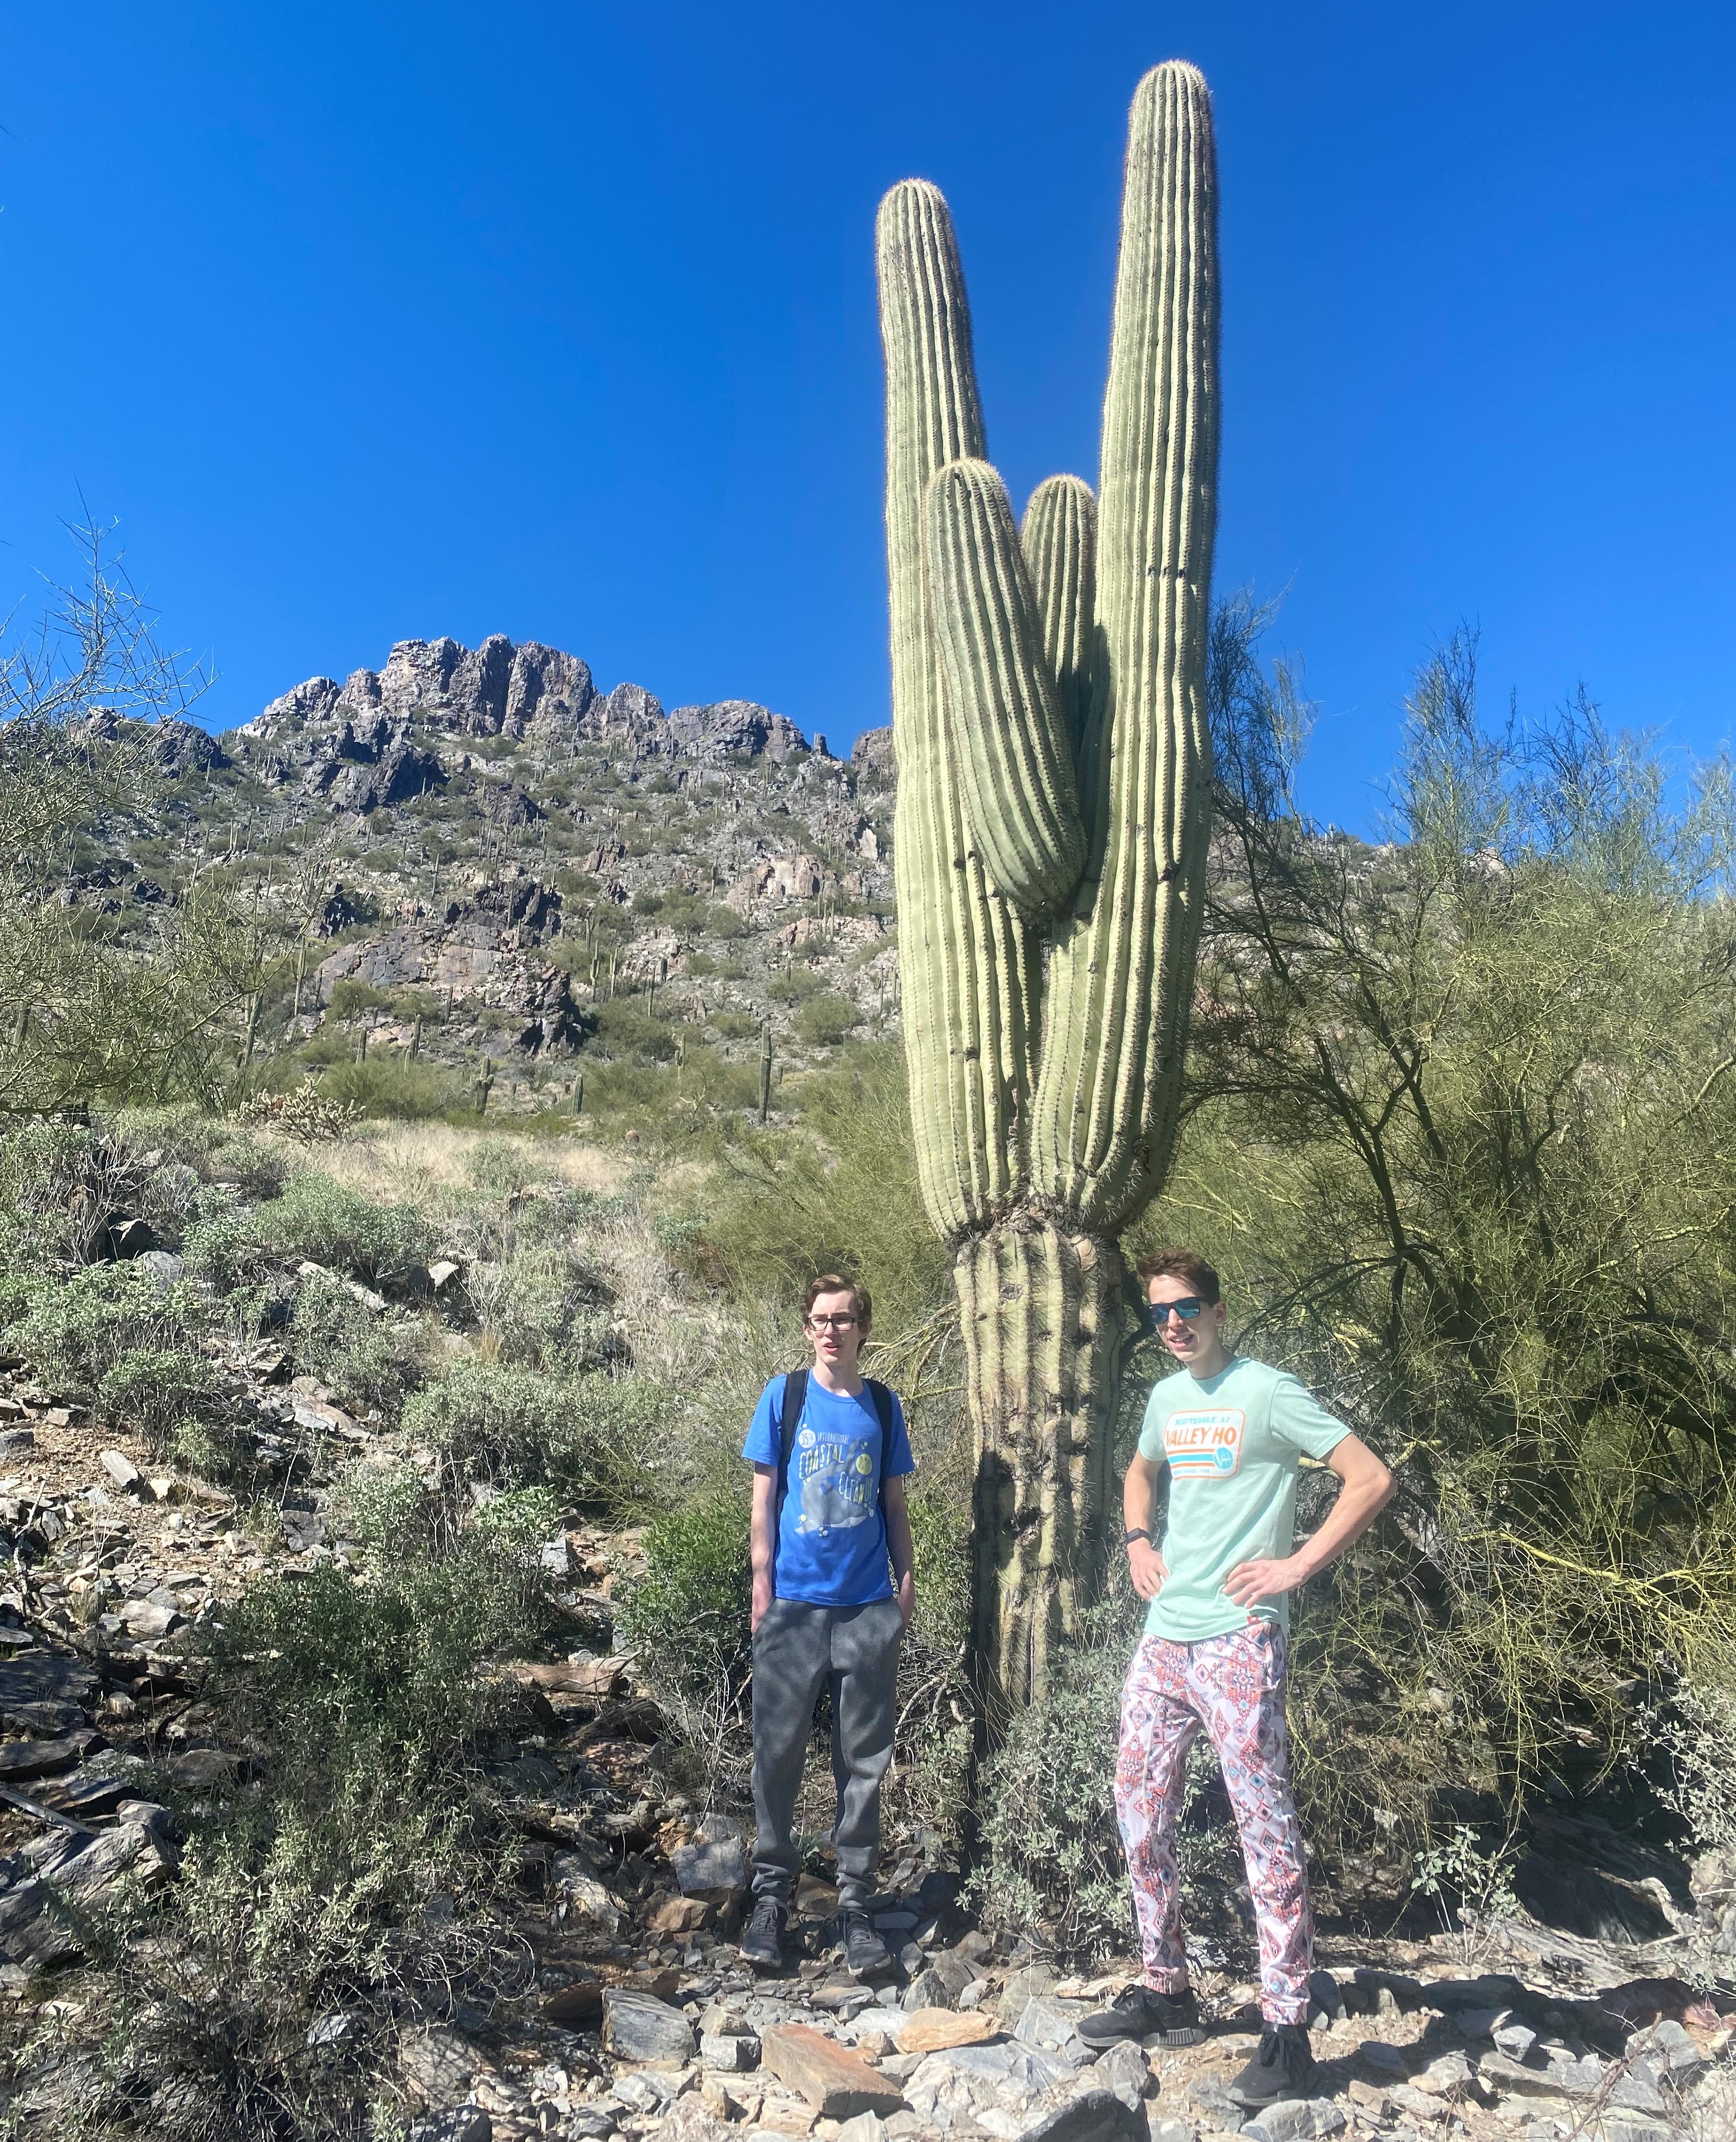 Ryan and Enzo pause to pose in front of a cactus during their hiking tour in Phoenix with the Wild Bunch Desert Guides.